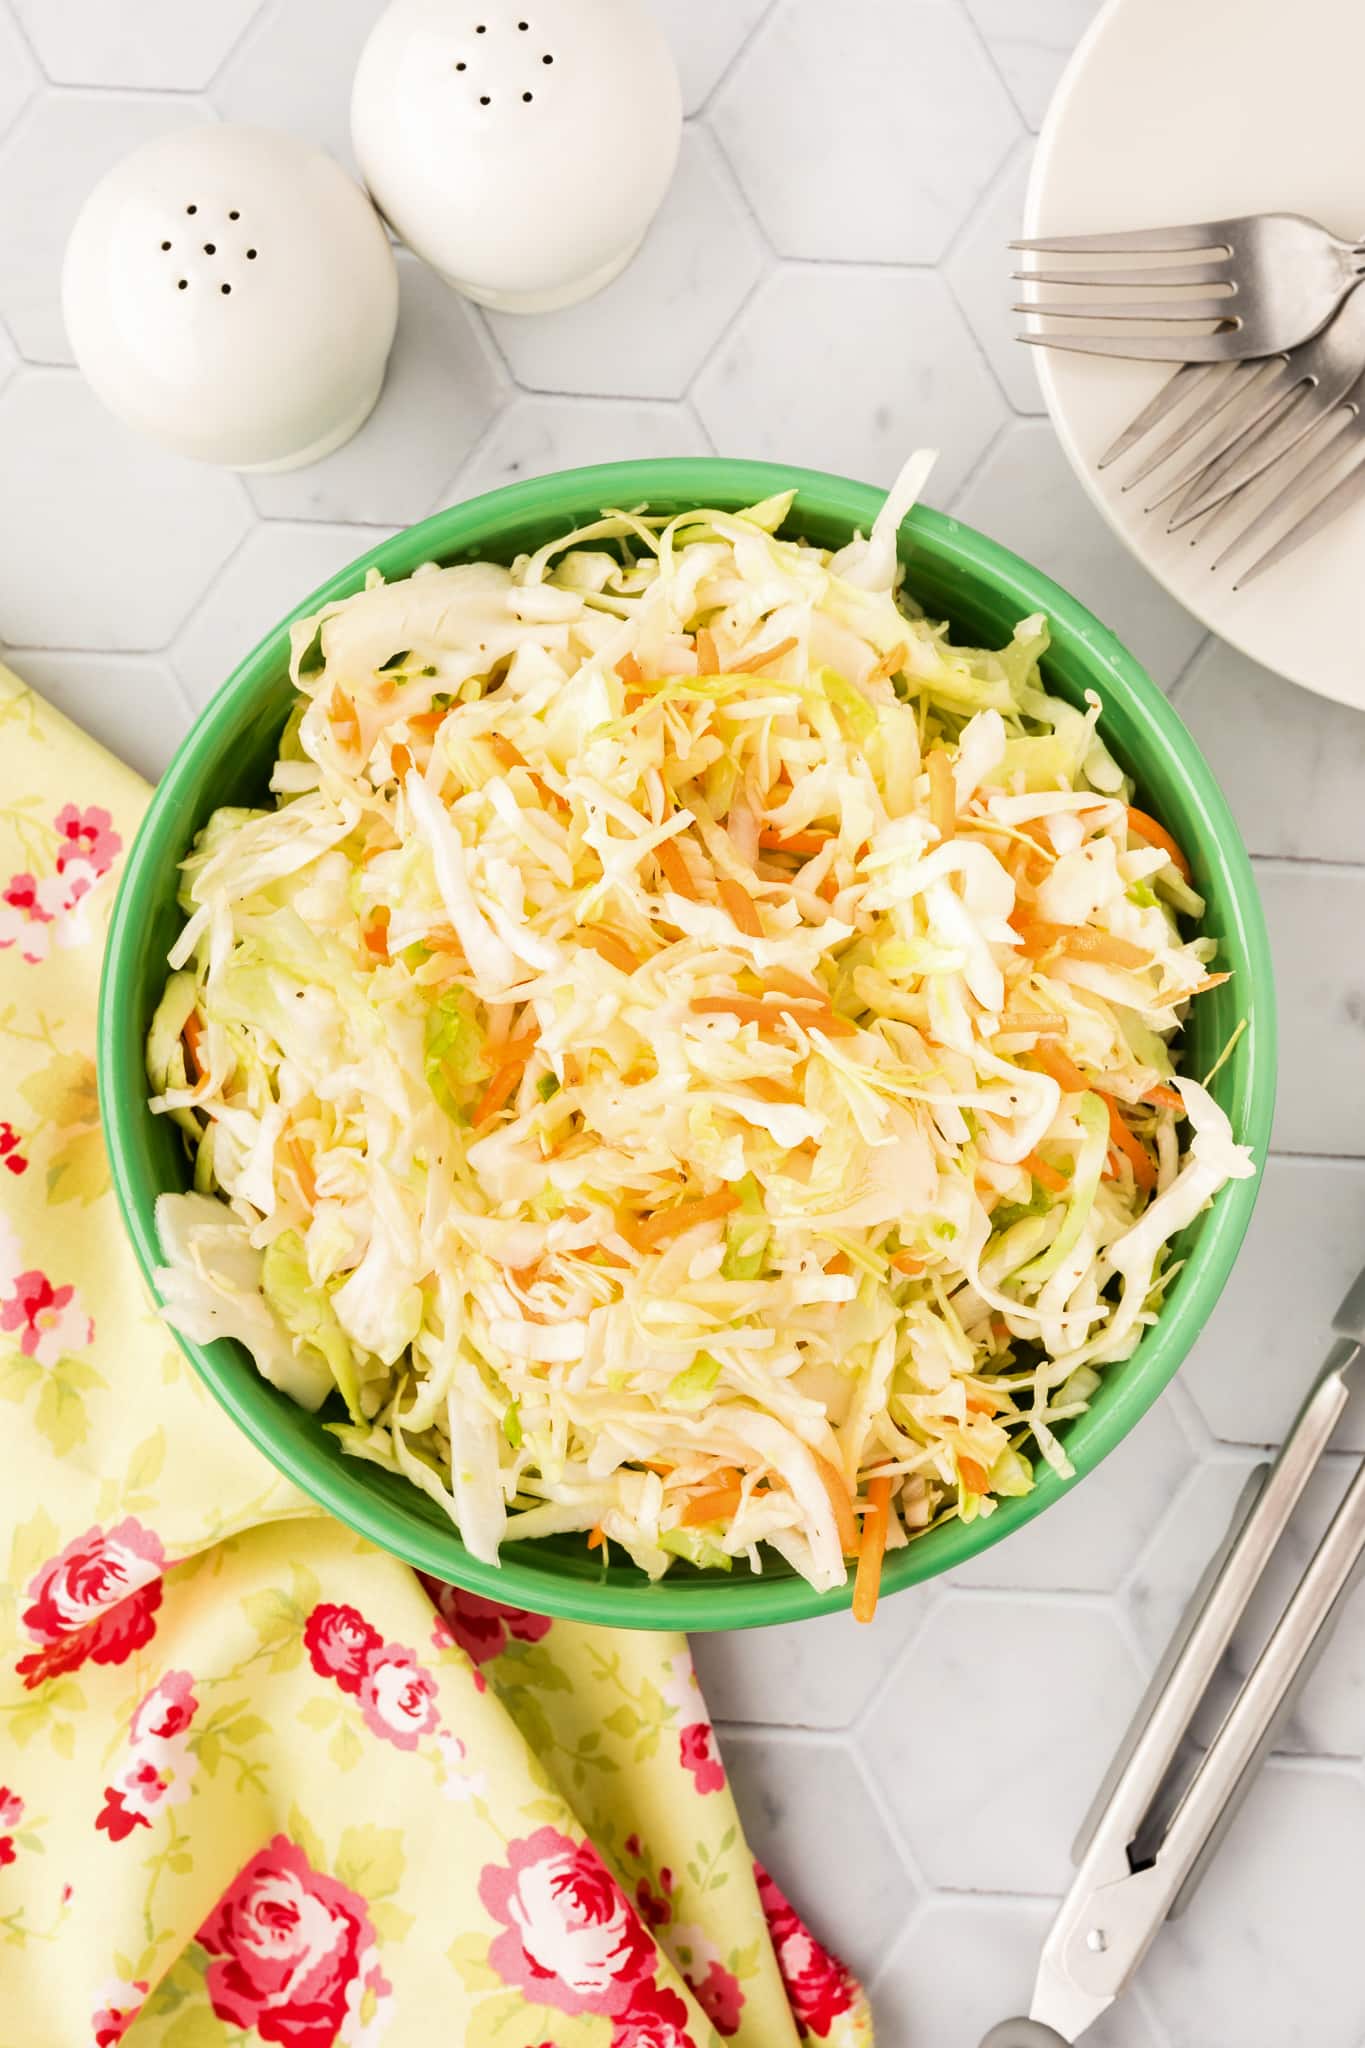 Coleslaw in a green bowl next to a fork and spoon.